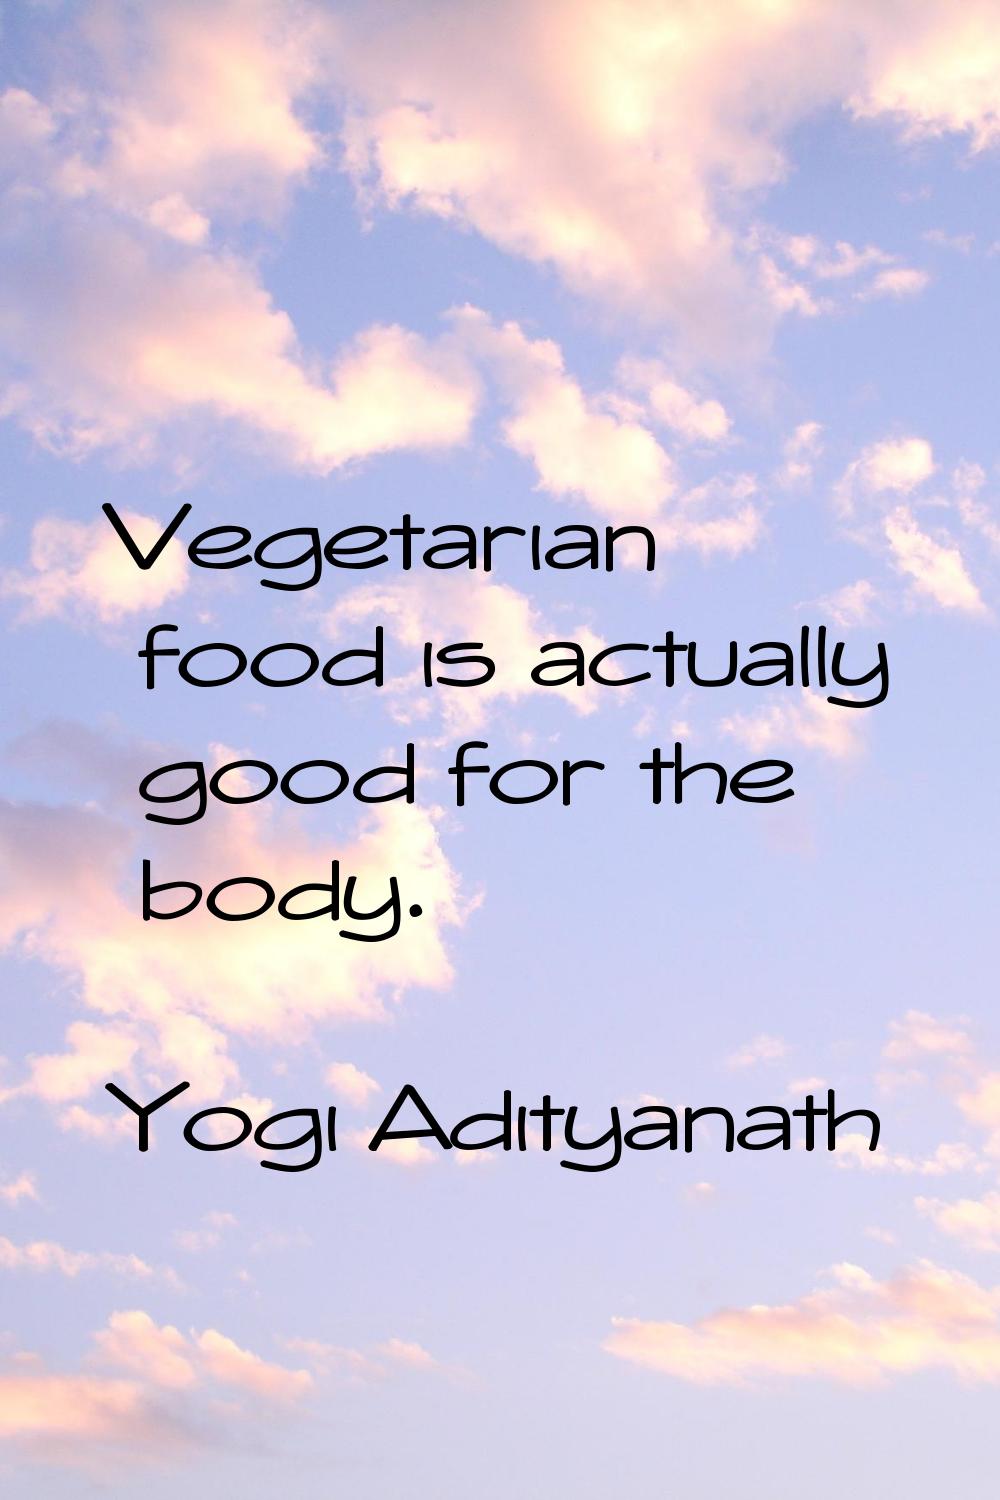 Vegetarian food is actually good for the body.